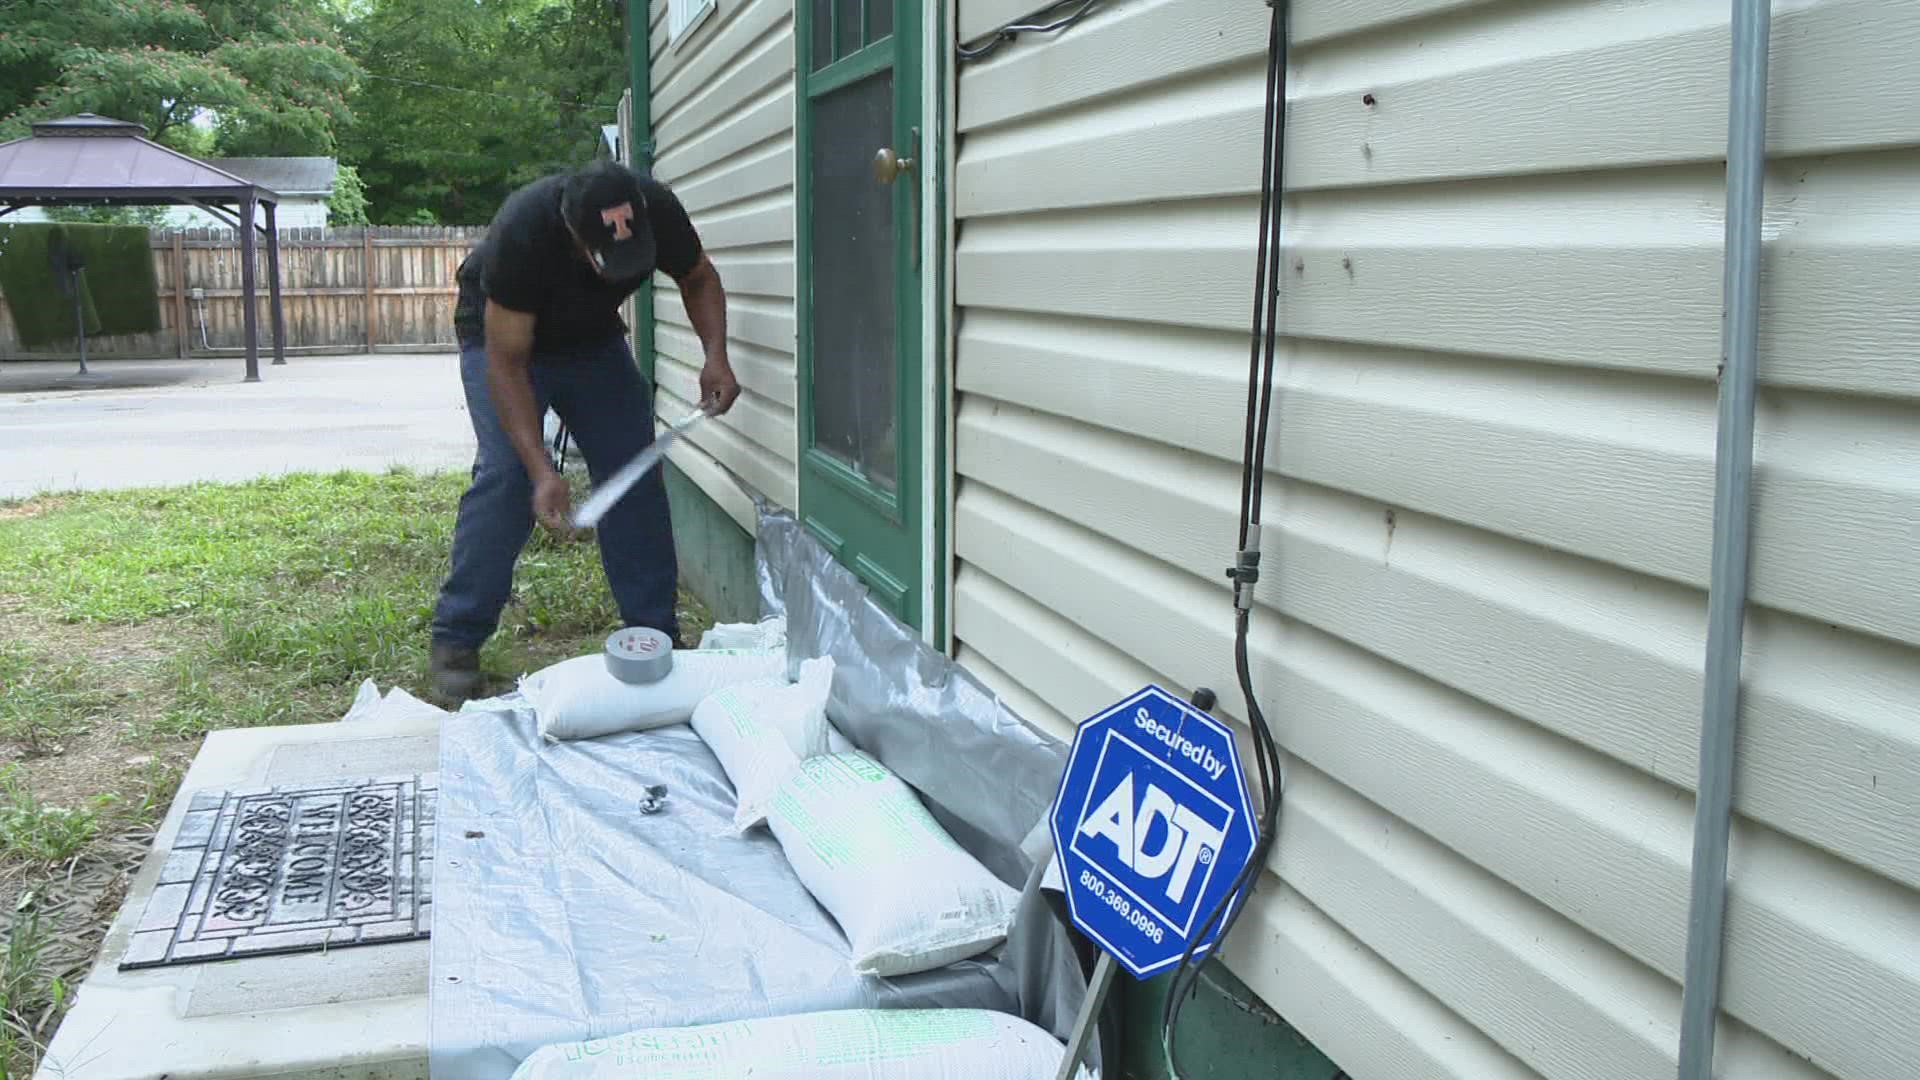 Rain fell again Wednesday on the hard-hit community as they were getting help from the flooding. They were hopeful to keep the water out of their homes this time.